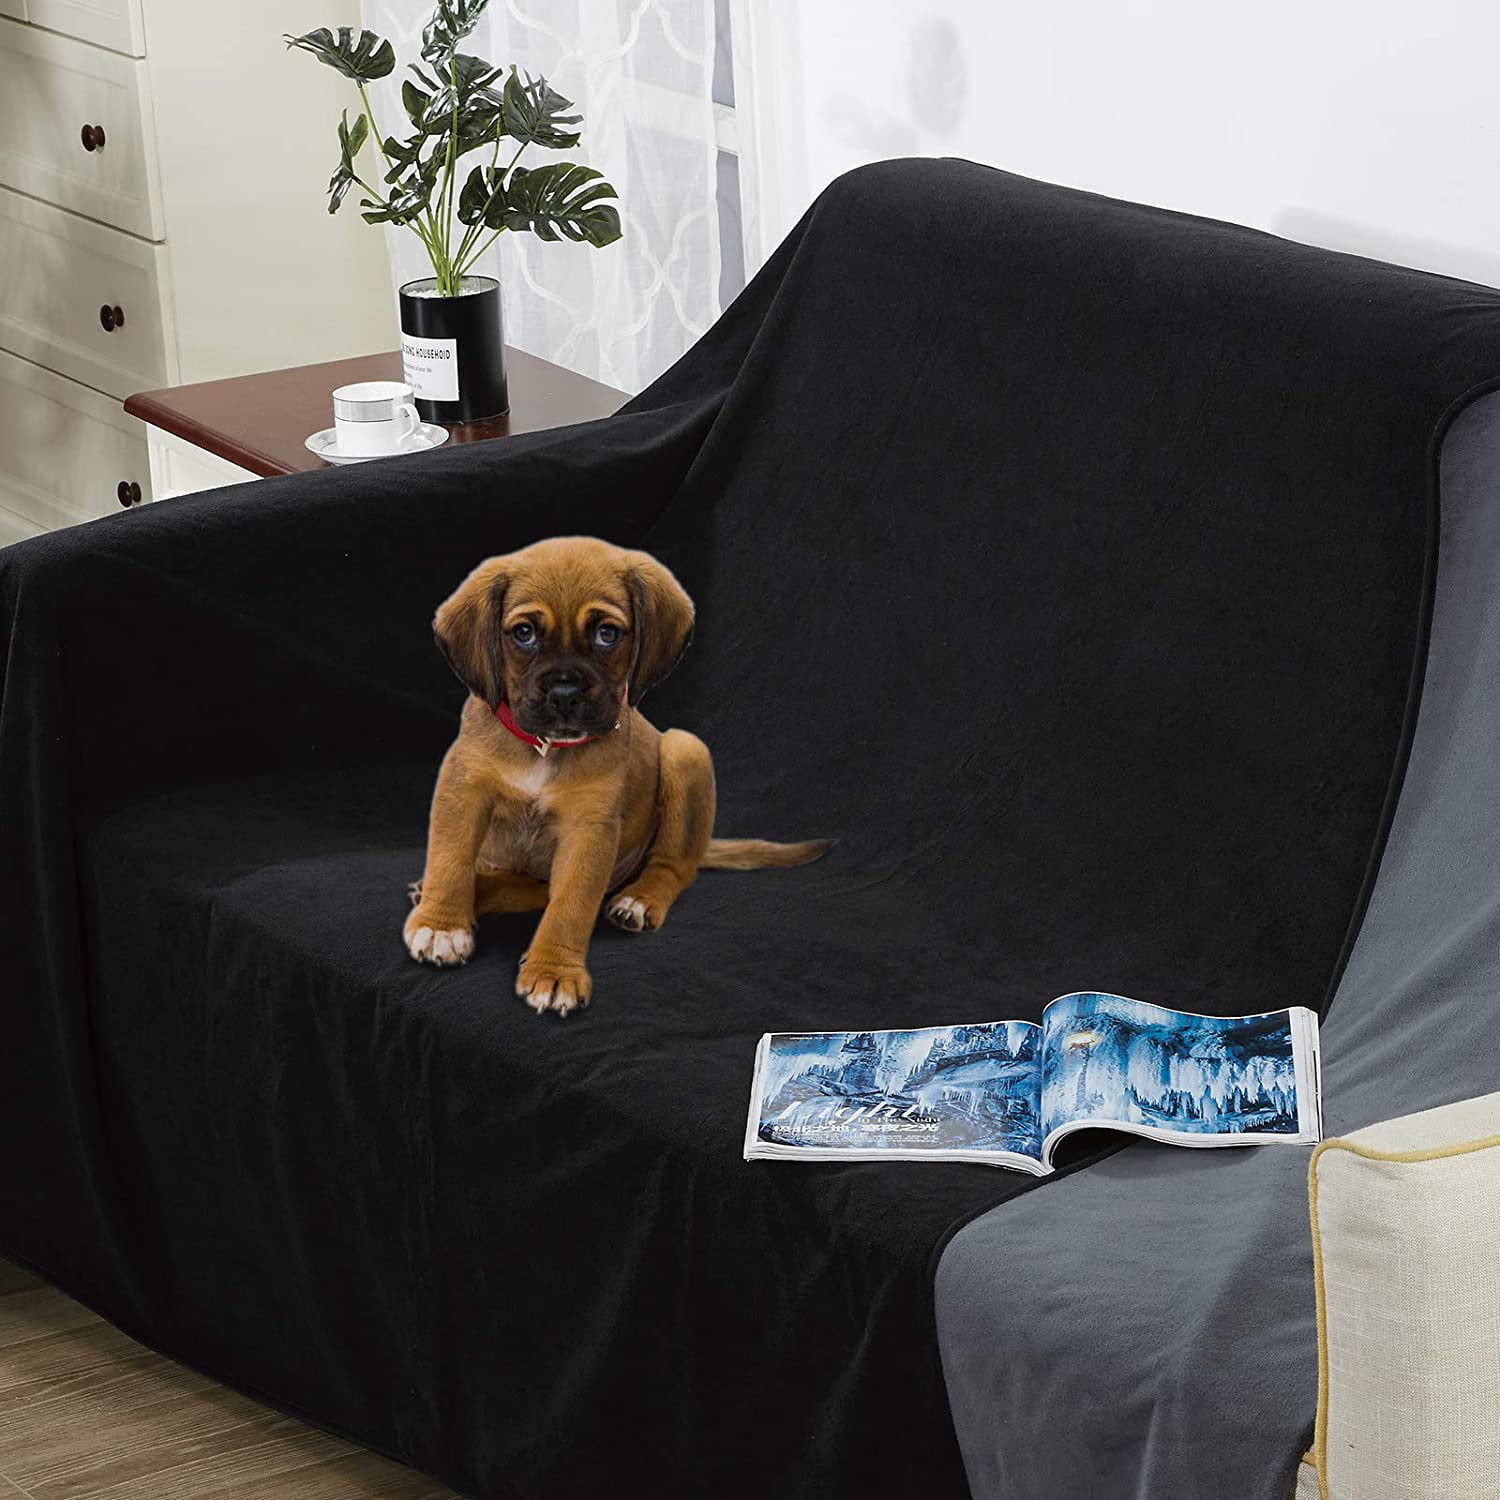 Light Grey,Reversible Lightweight Softan Waterproof 100% Leak Proof Blanket for Baby Adults Pets Dogs Cats,Pee Proof,3 Layer Protector for Bed,Sofa and Couch,Sofa:60x120,Charcoal